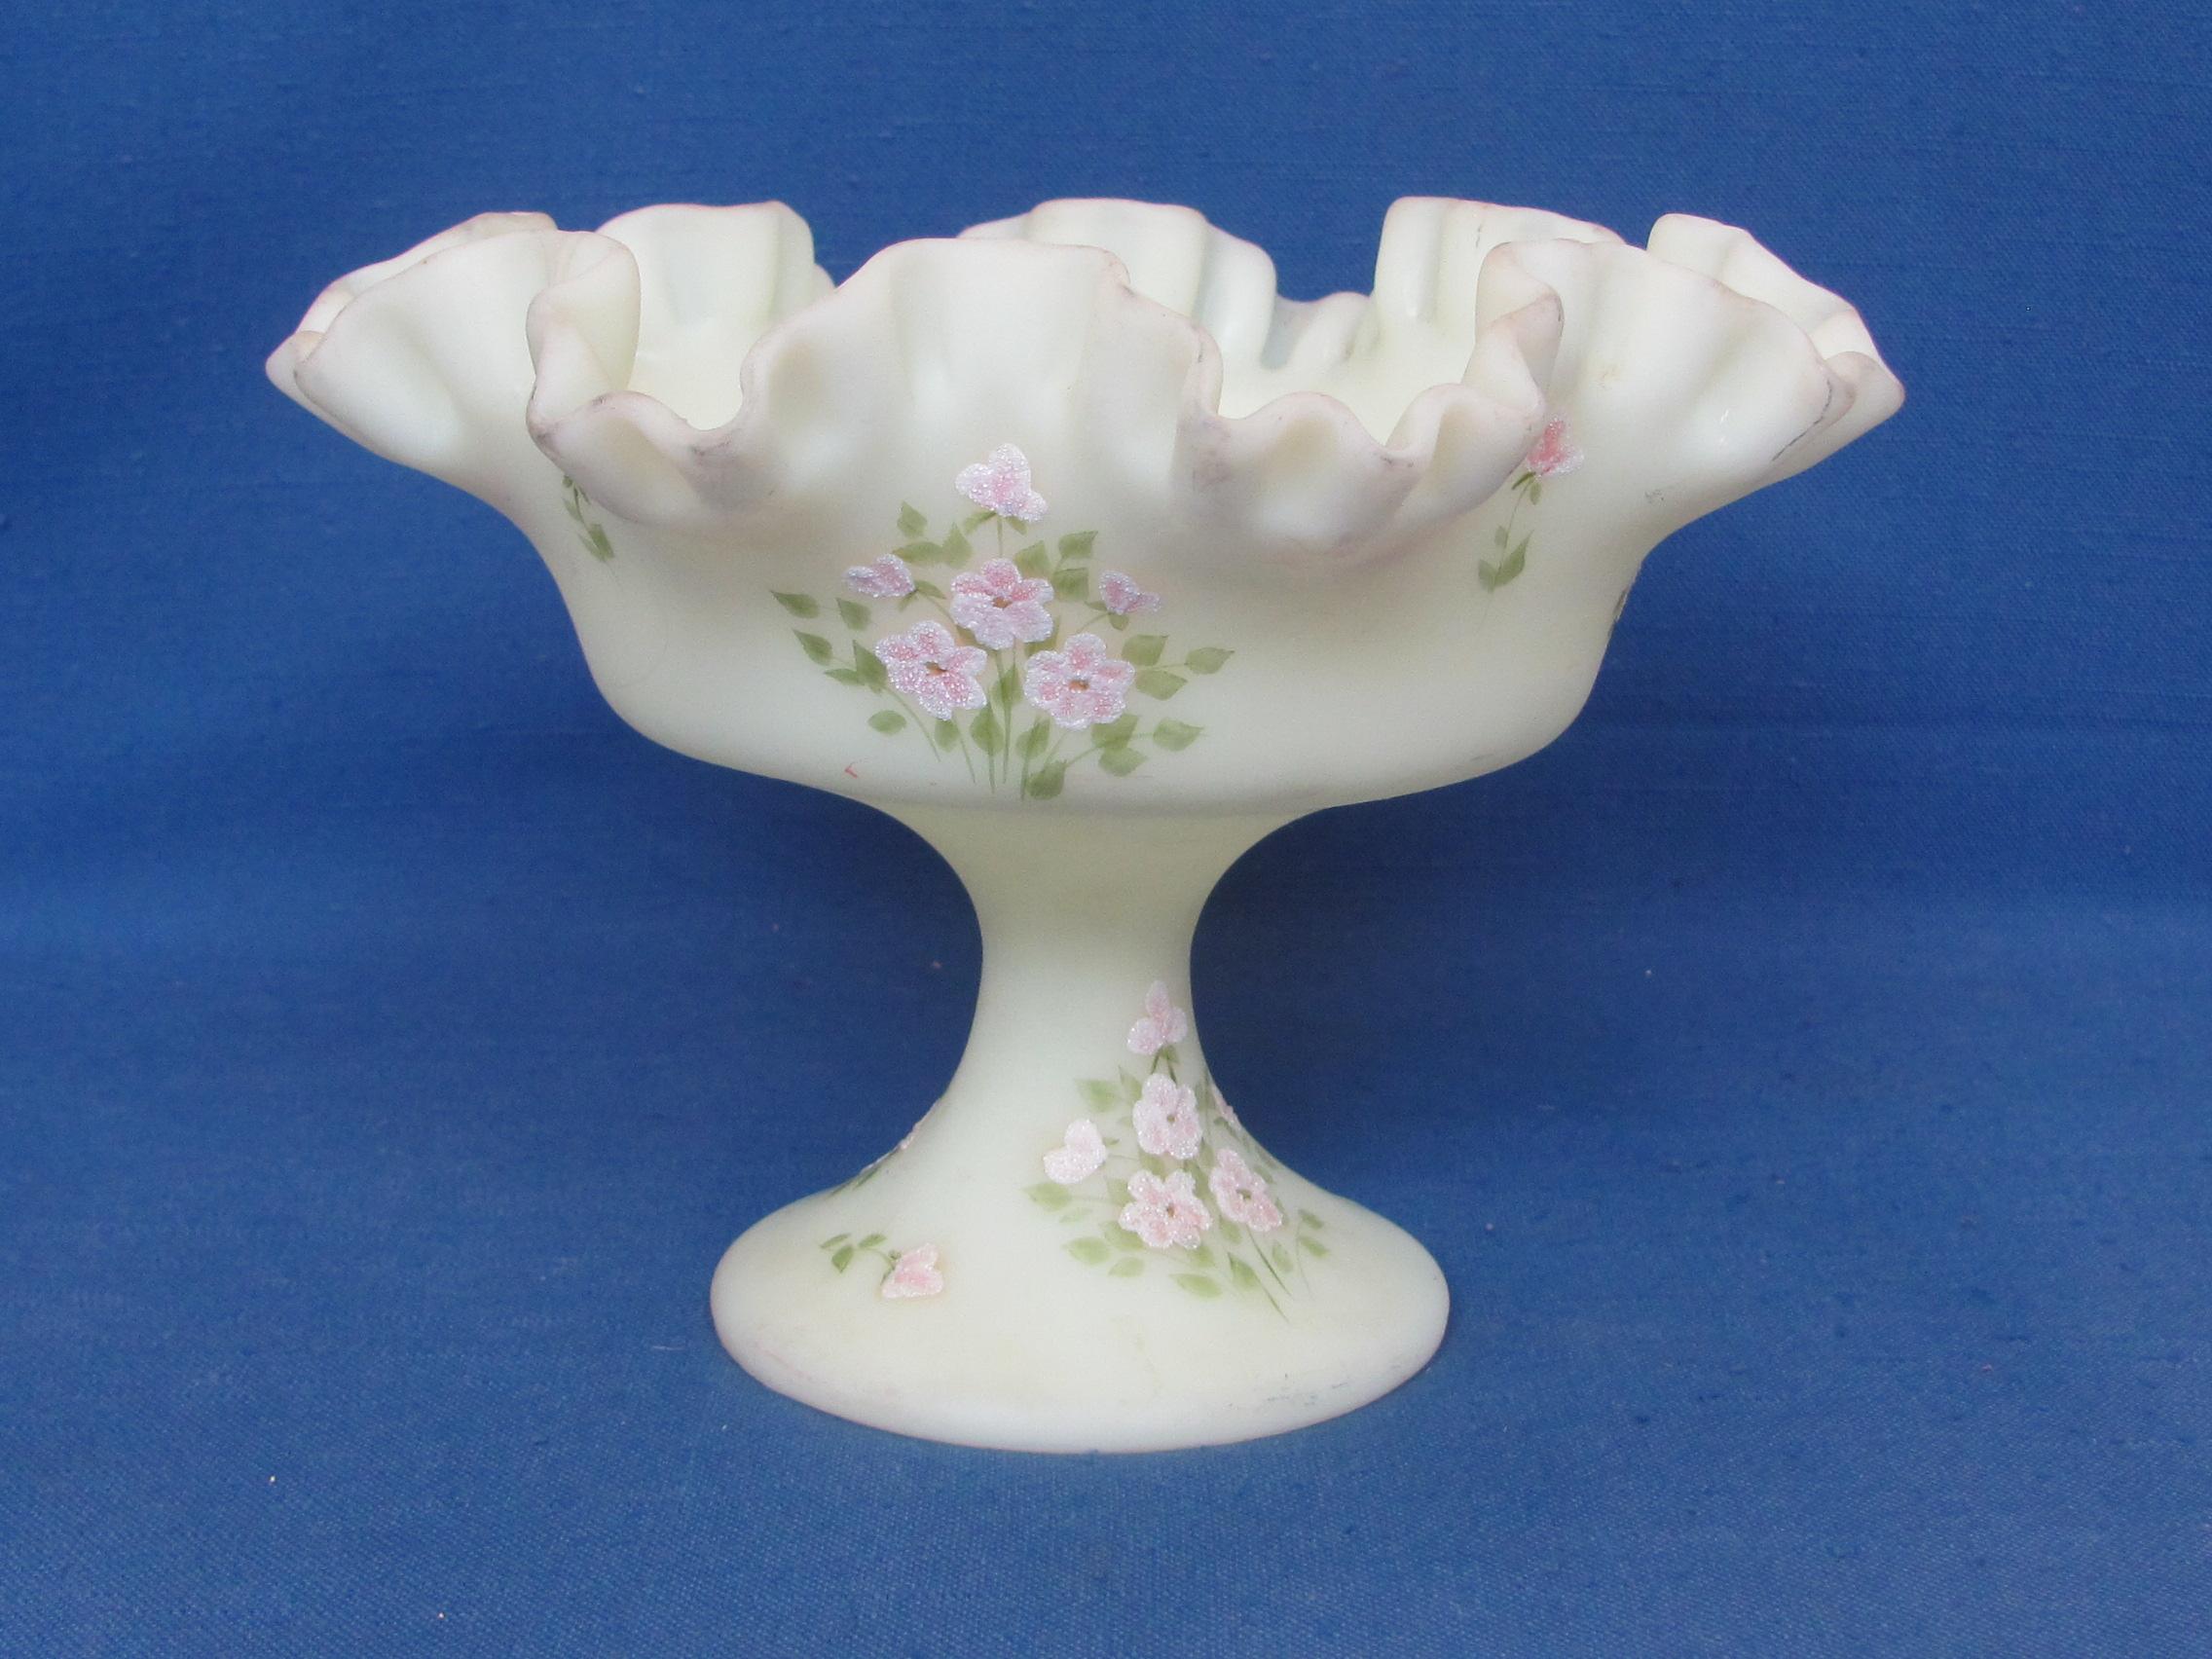 Fenton Satin Custard Glass – Hand Painted Footed Bowl – 8” in diameter – Floral design